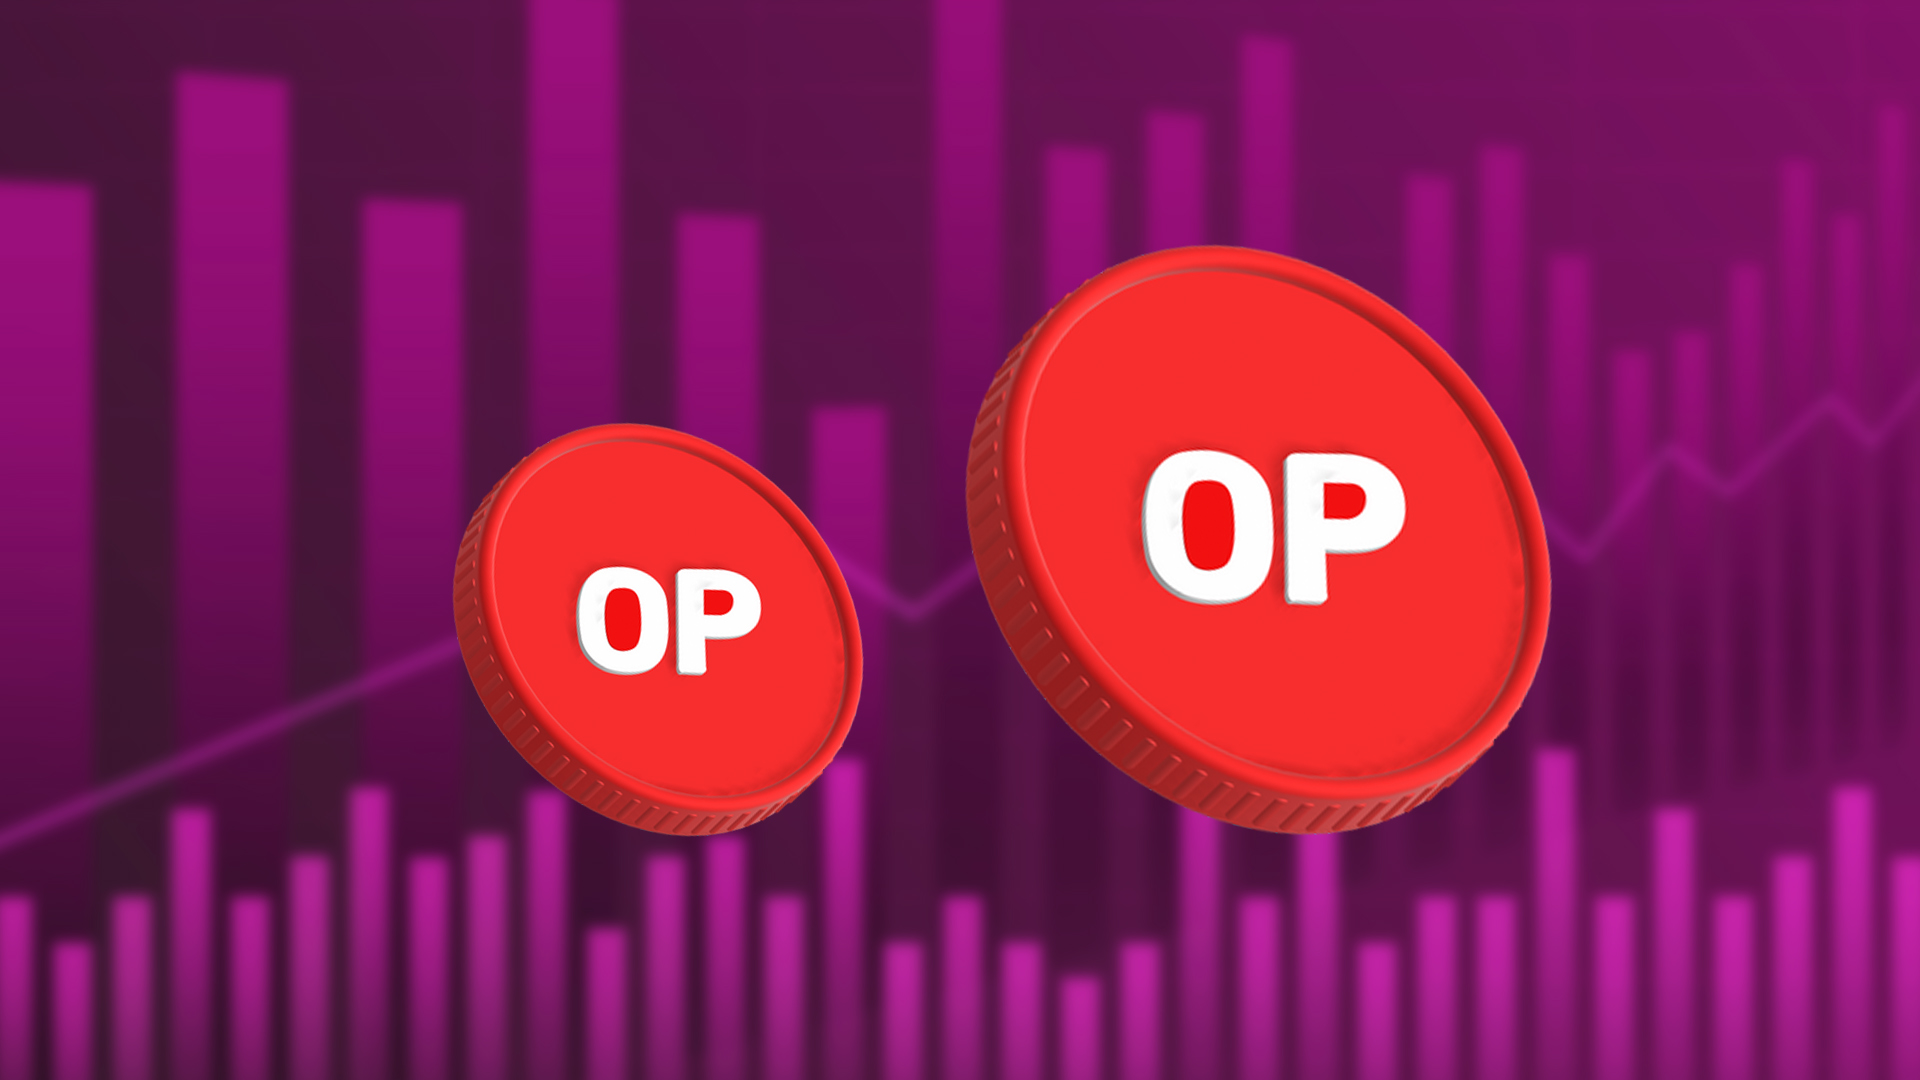 Optimism Price Prediction: Will OP Rebound From Here?